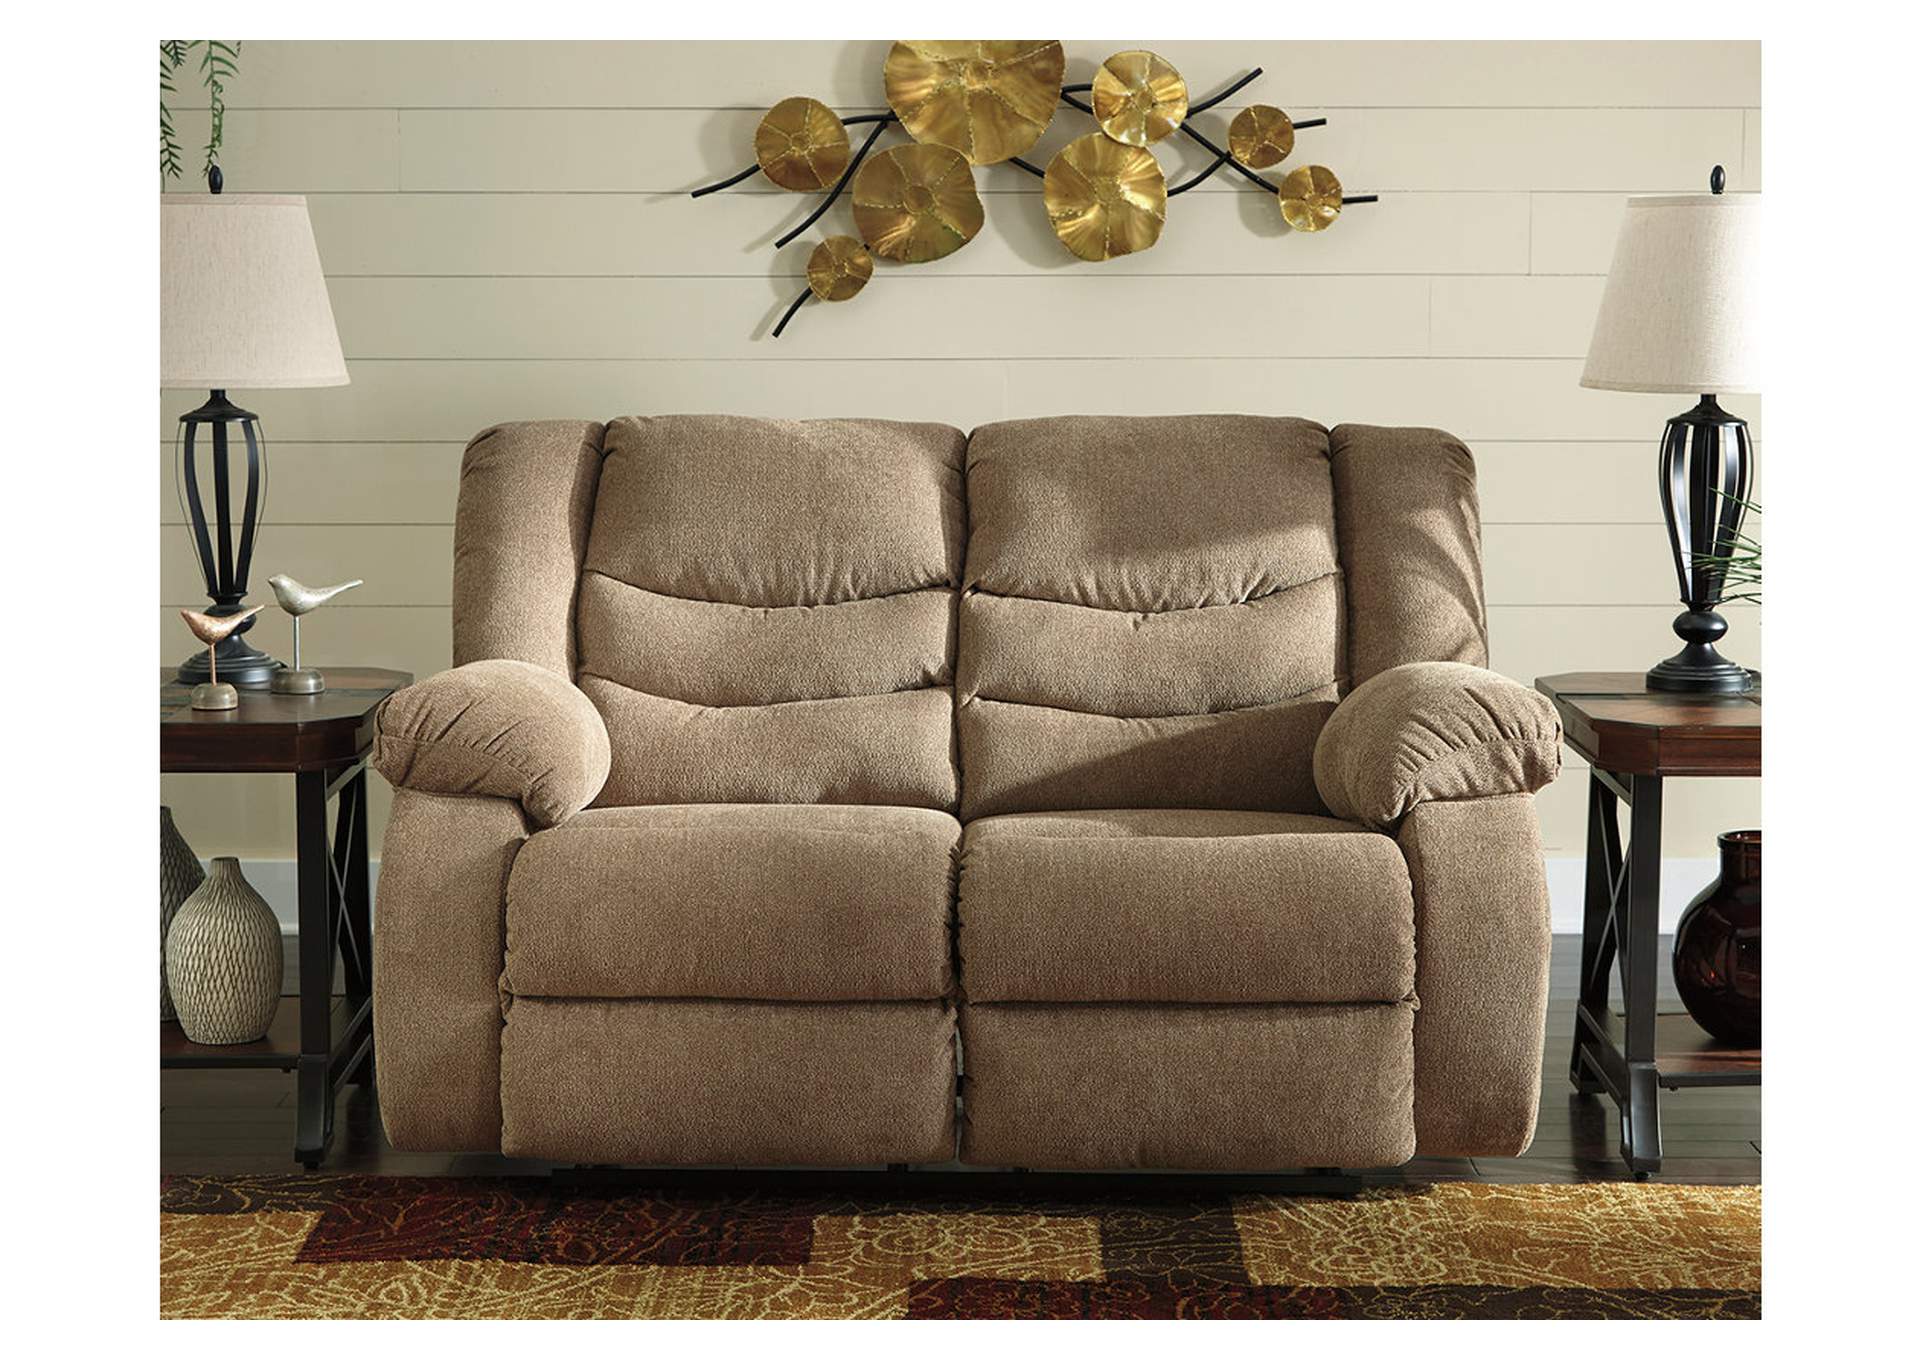 Tulen Sofa, Loveseat and Recliner,Signature Design By Ashley